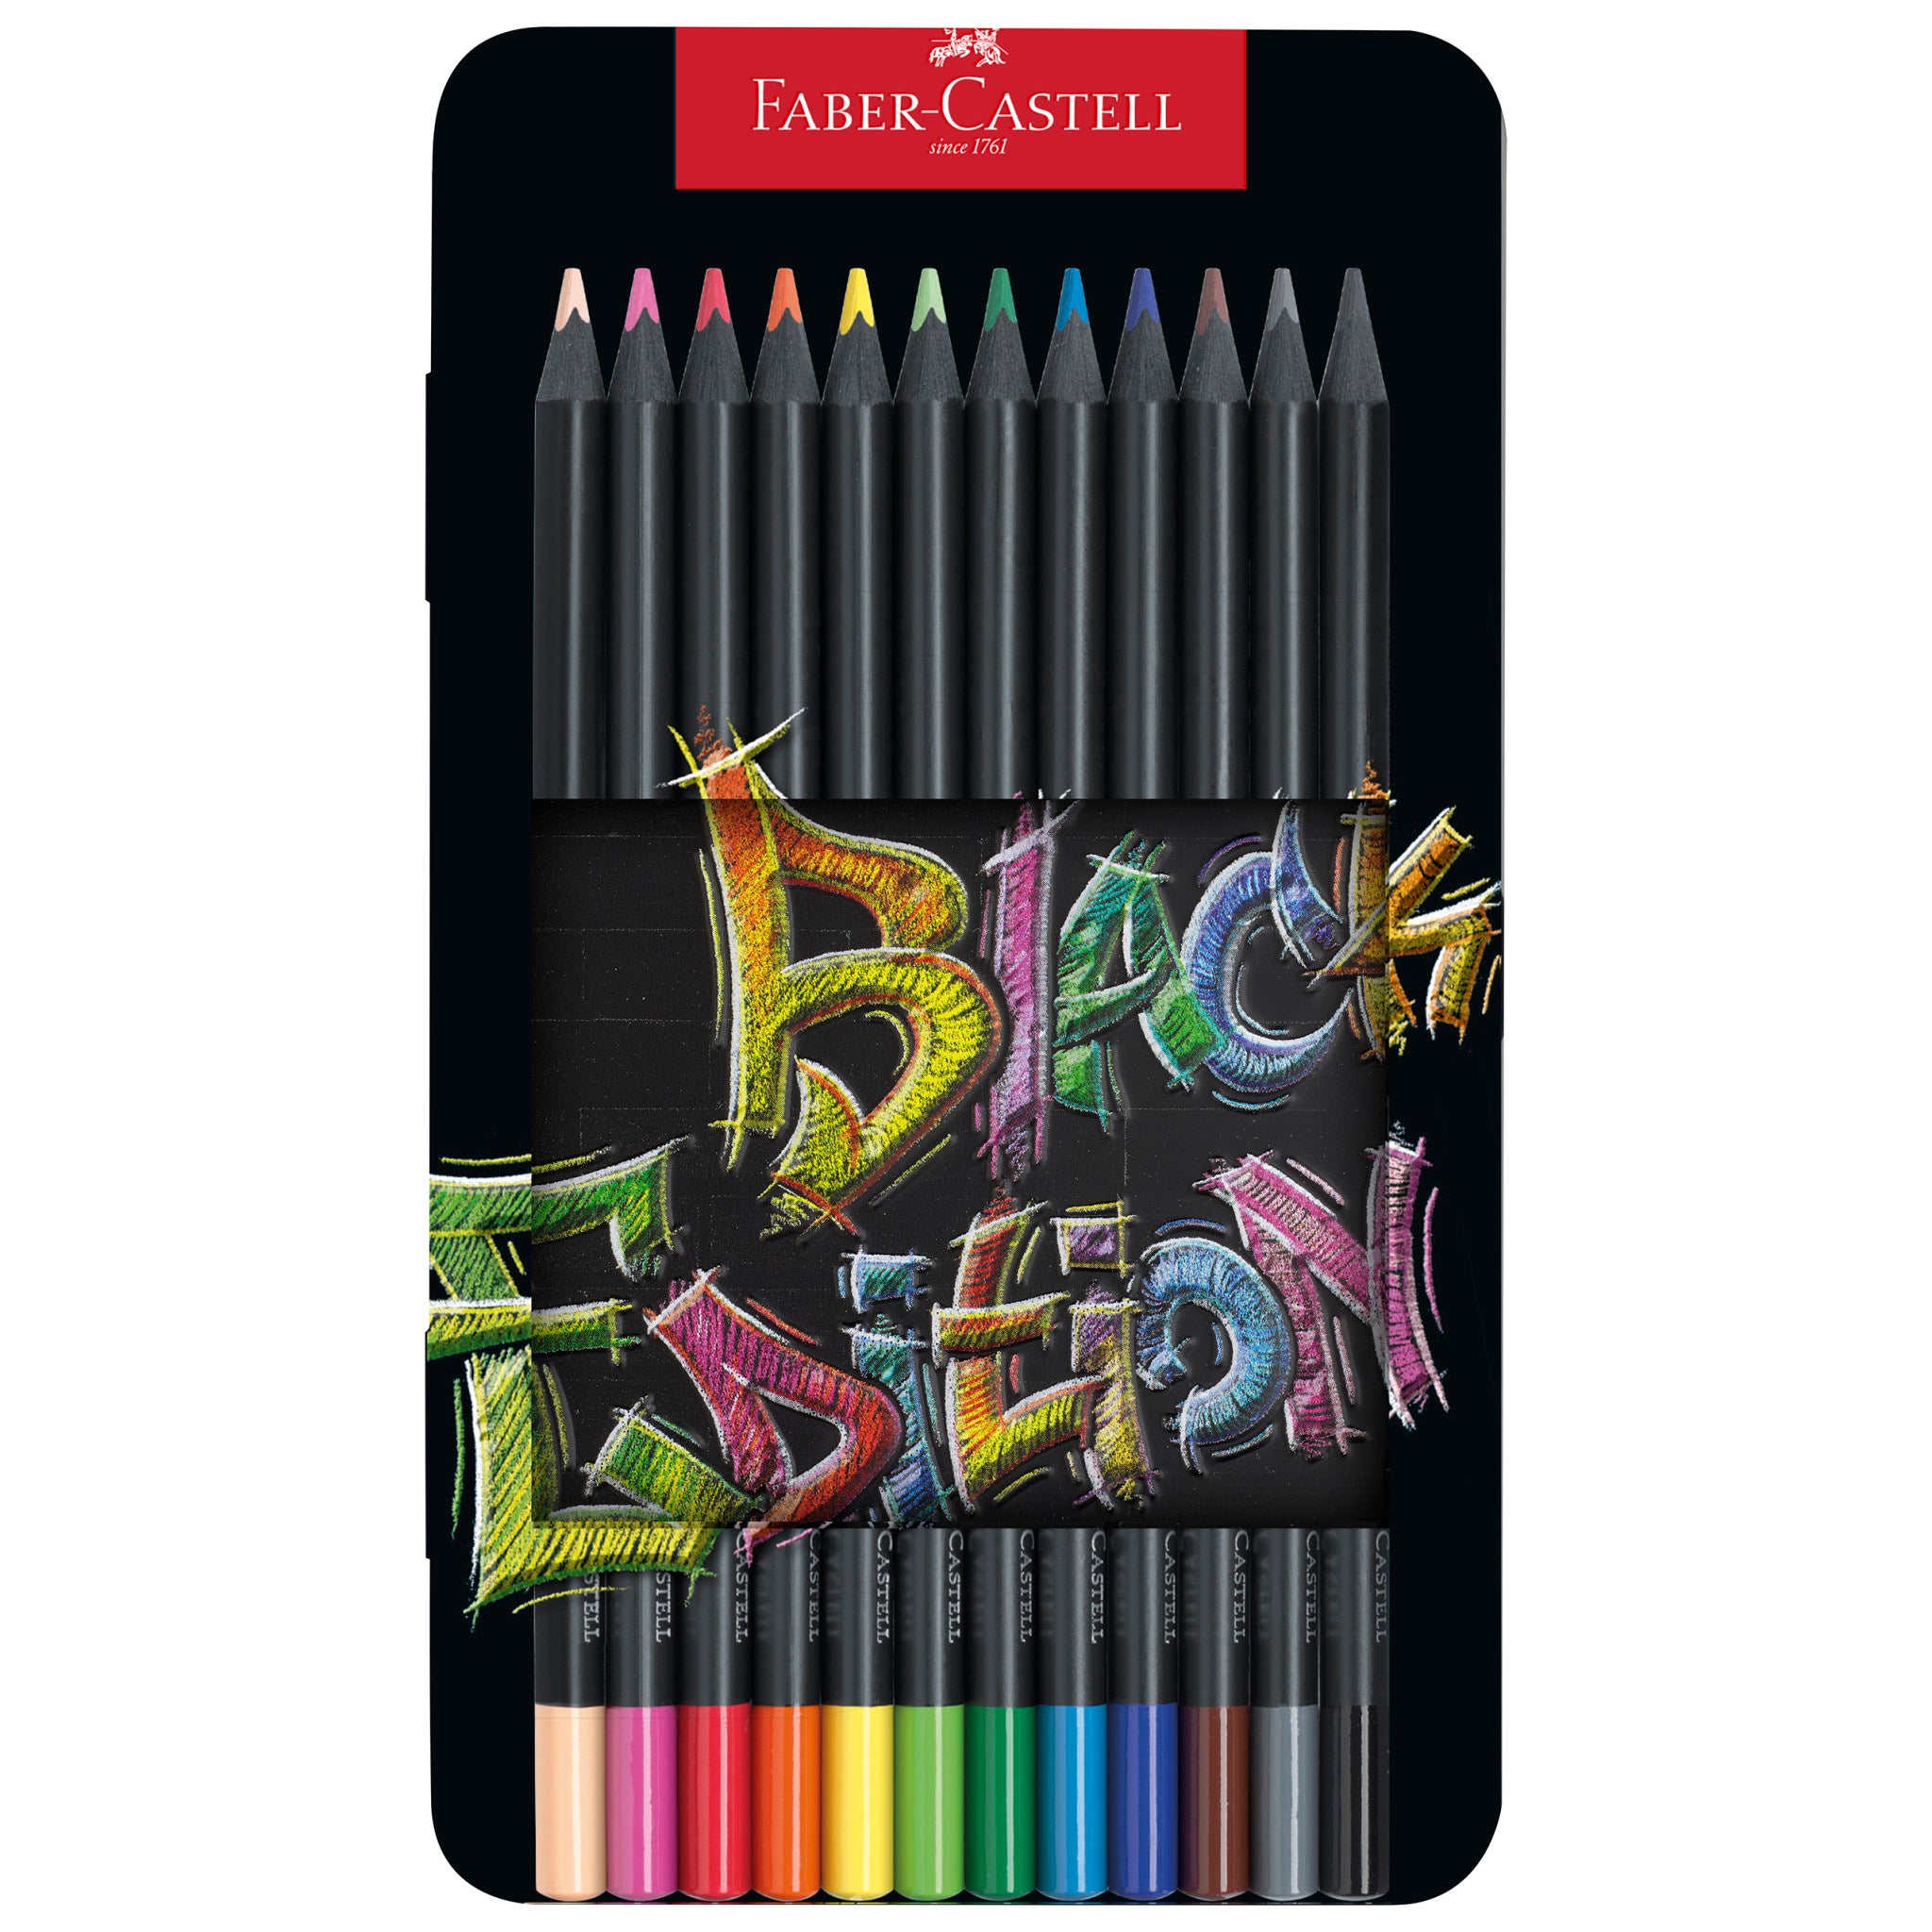 Faber-Castell Black Edition Colored Pencils - 24 Count, Black Wood and  Super Soft Core Lead, Coloring Pencils for Adult Coloring Books, Art  Colored